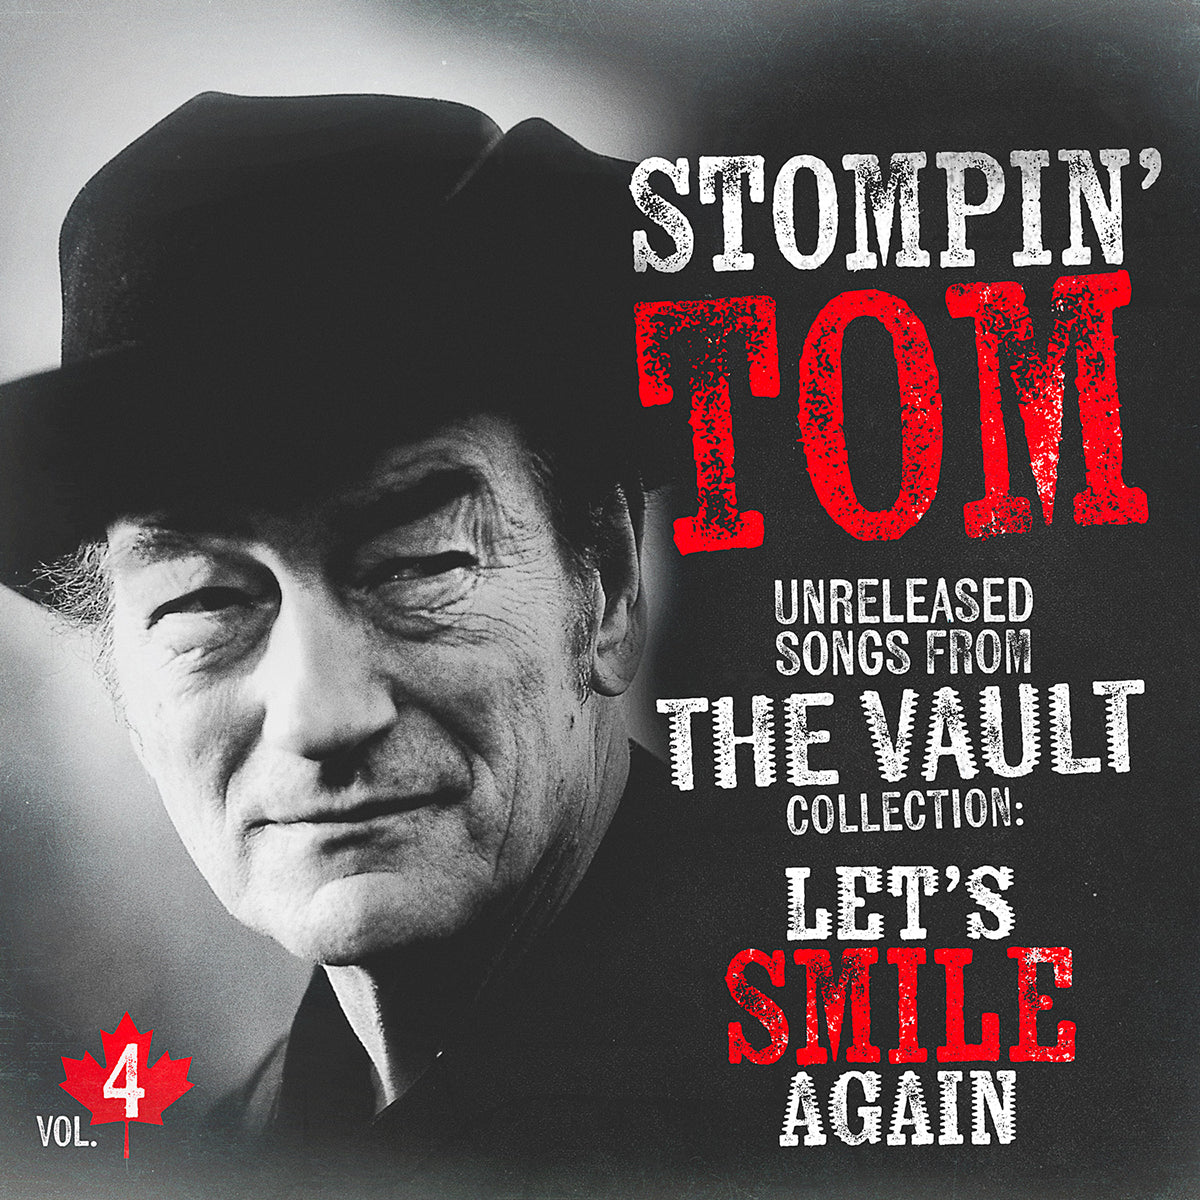 Stompin Tom Connors - Unreleased Songs From the Vault Volume 4 (Vinyl LP)